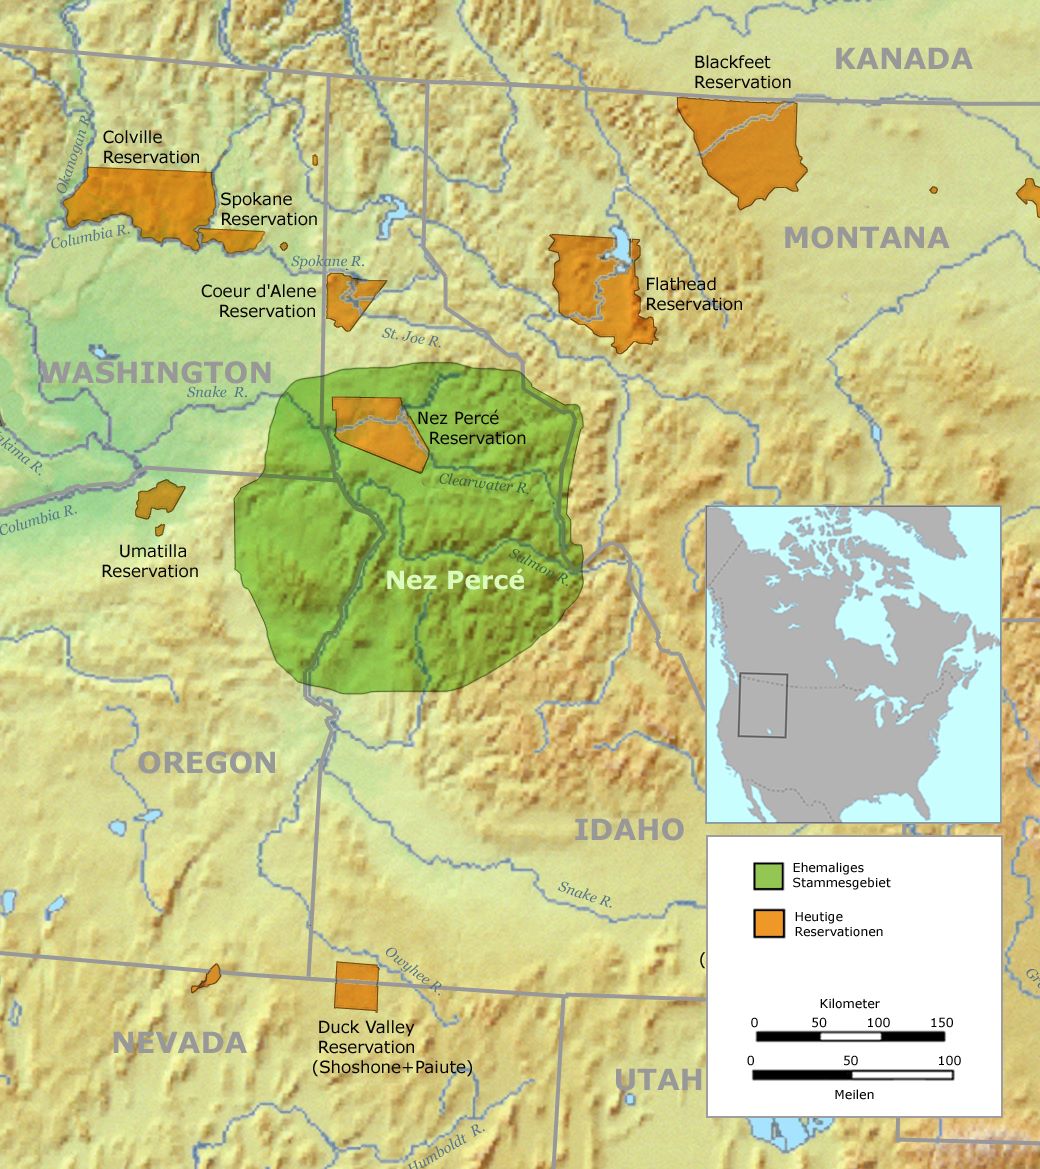 Original Nez Perce territory (green) and the reduced reservation of 1863 (brown)